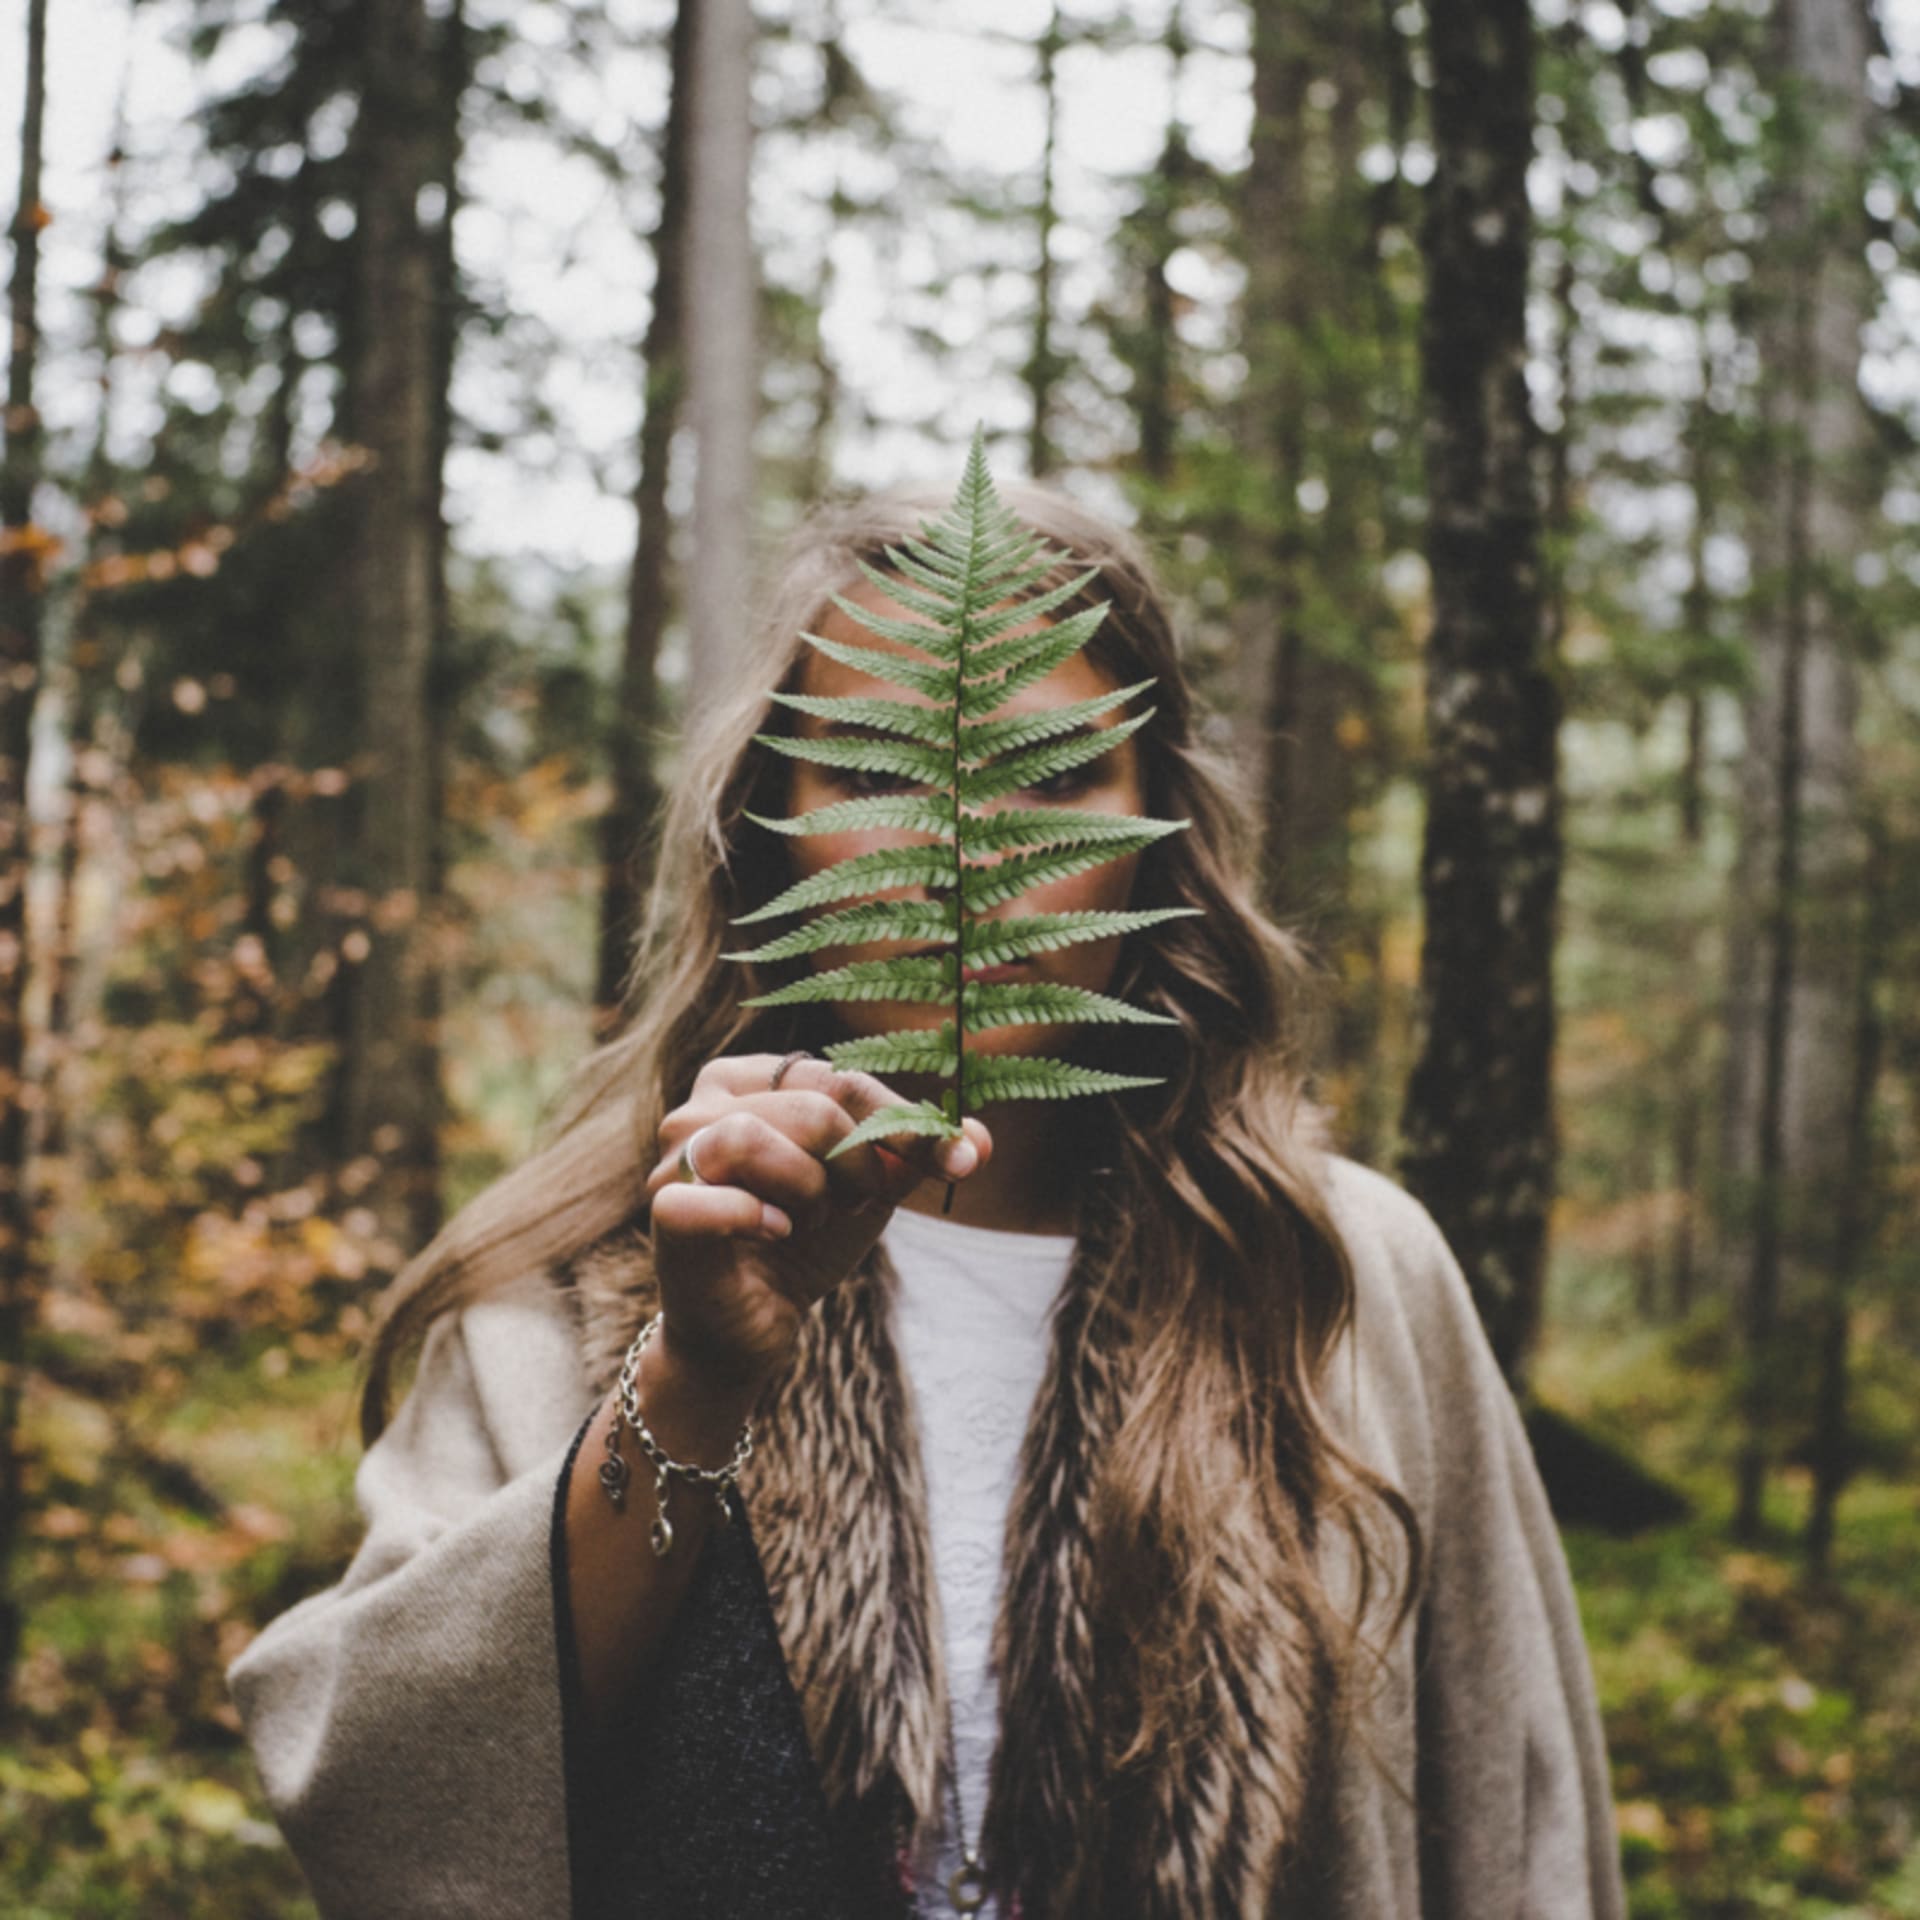 Girl holding a plant in Finnish forest